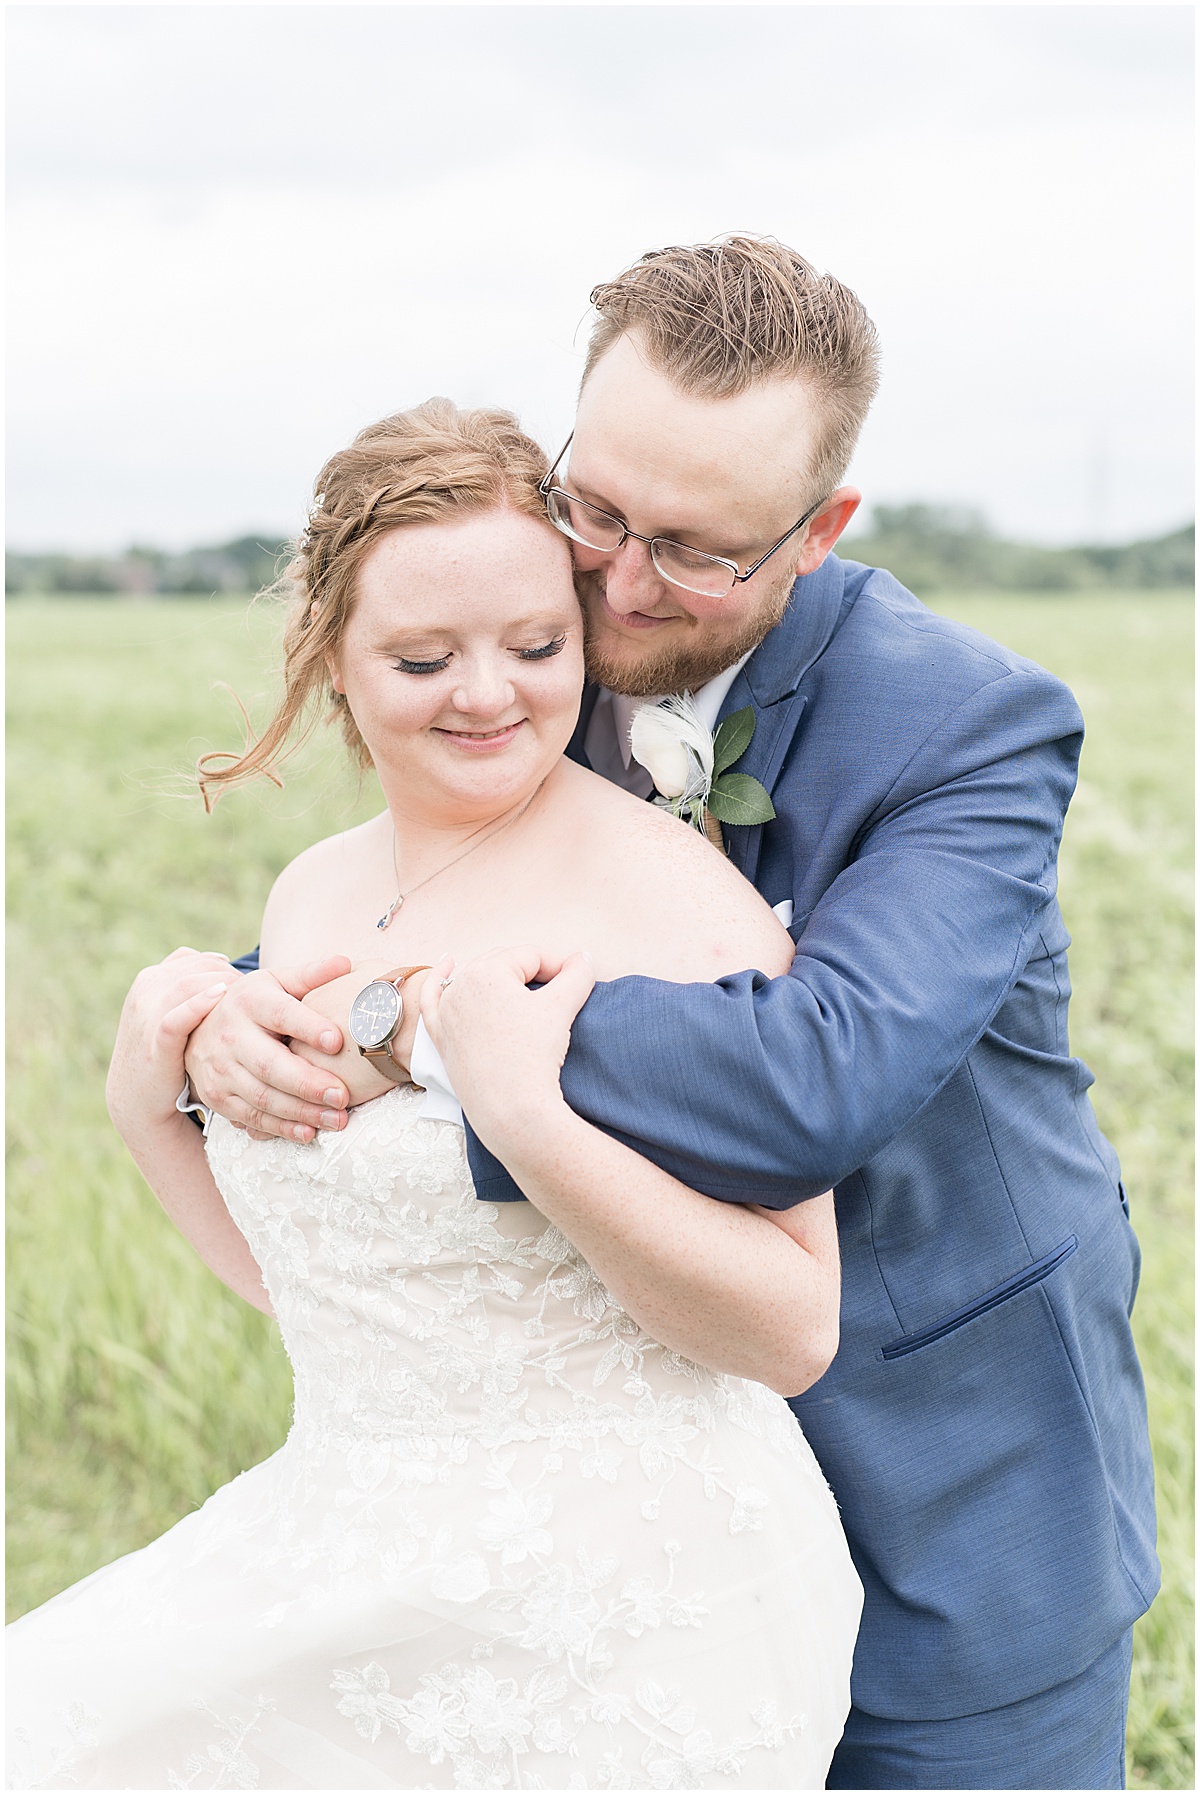 Bride and groom at County Line Orchard wedding photographed by Victoria Rayburn Photography